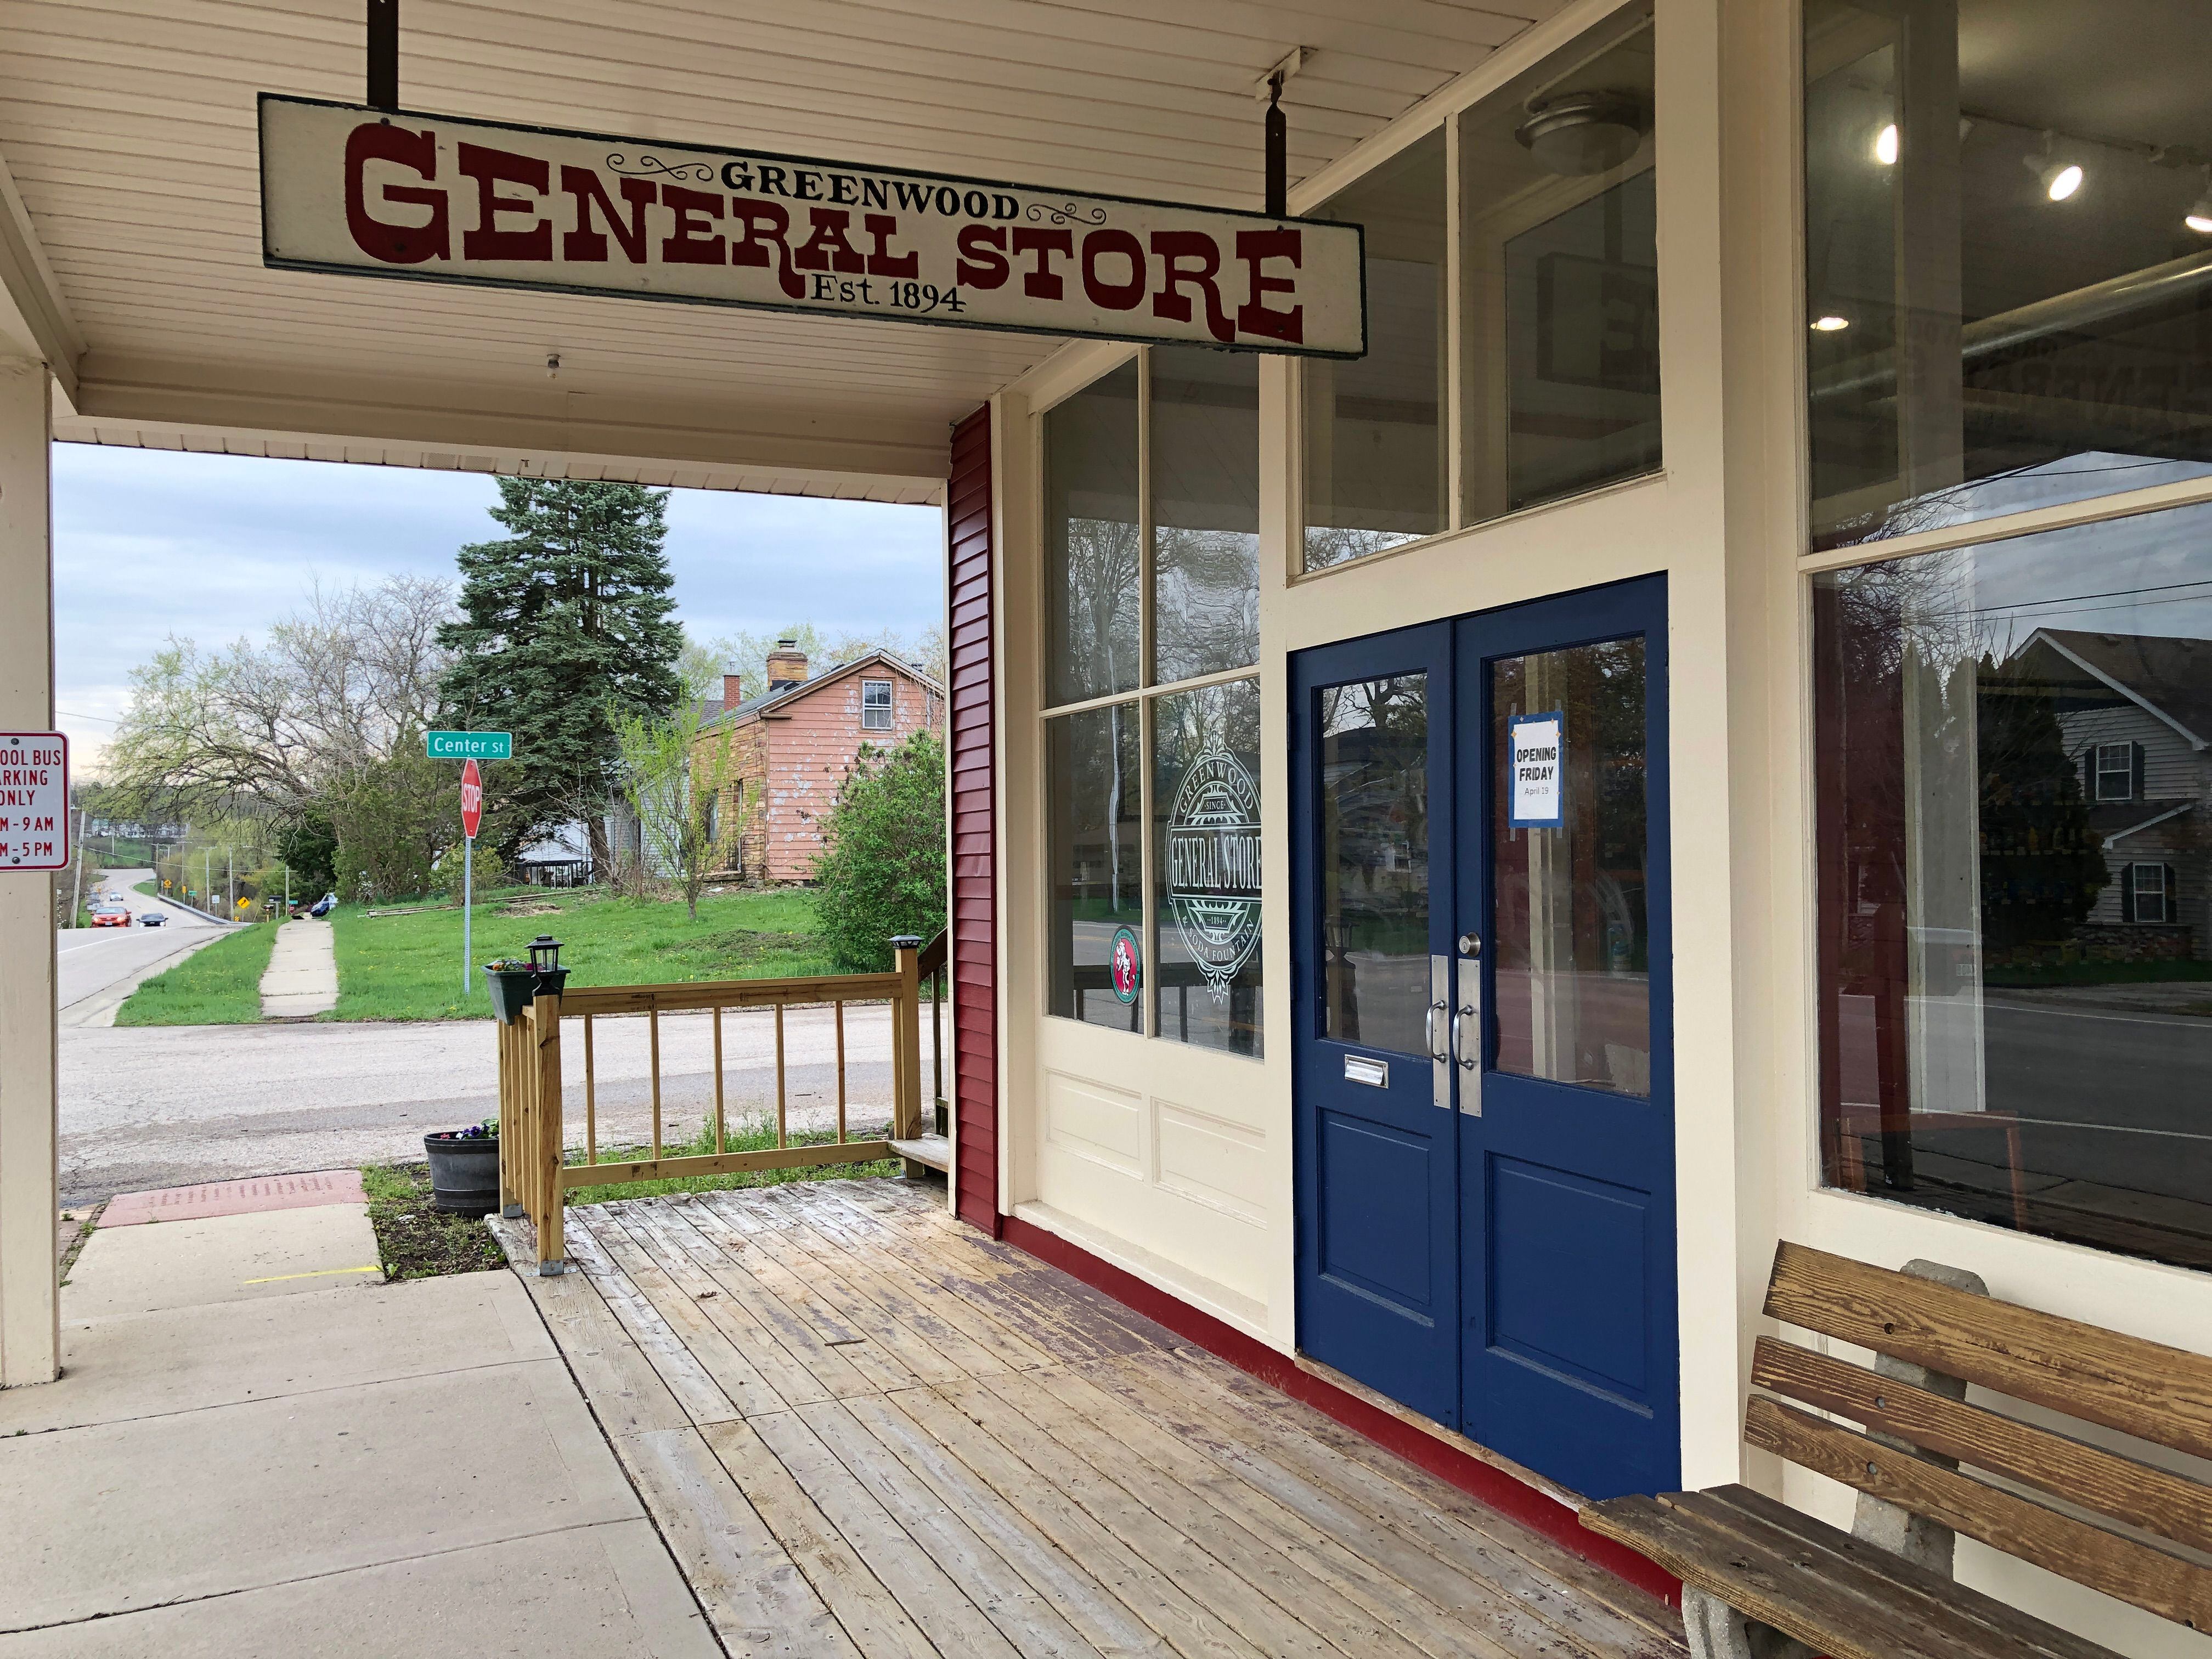 James Krzyak and his partner, Emily Truscott, have been working since August to reopen The Greenwood General Store on Friday, April 19, 2024.